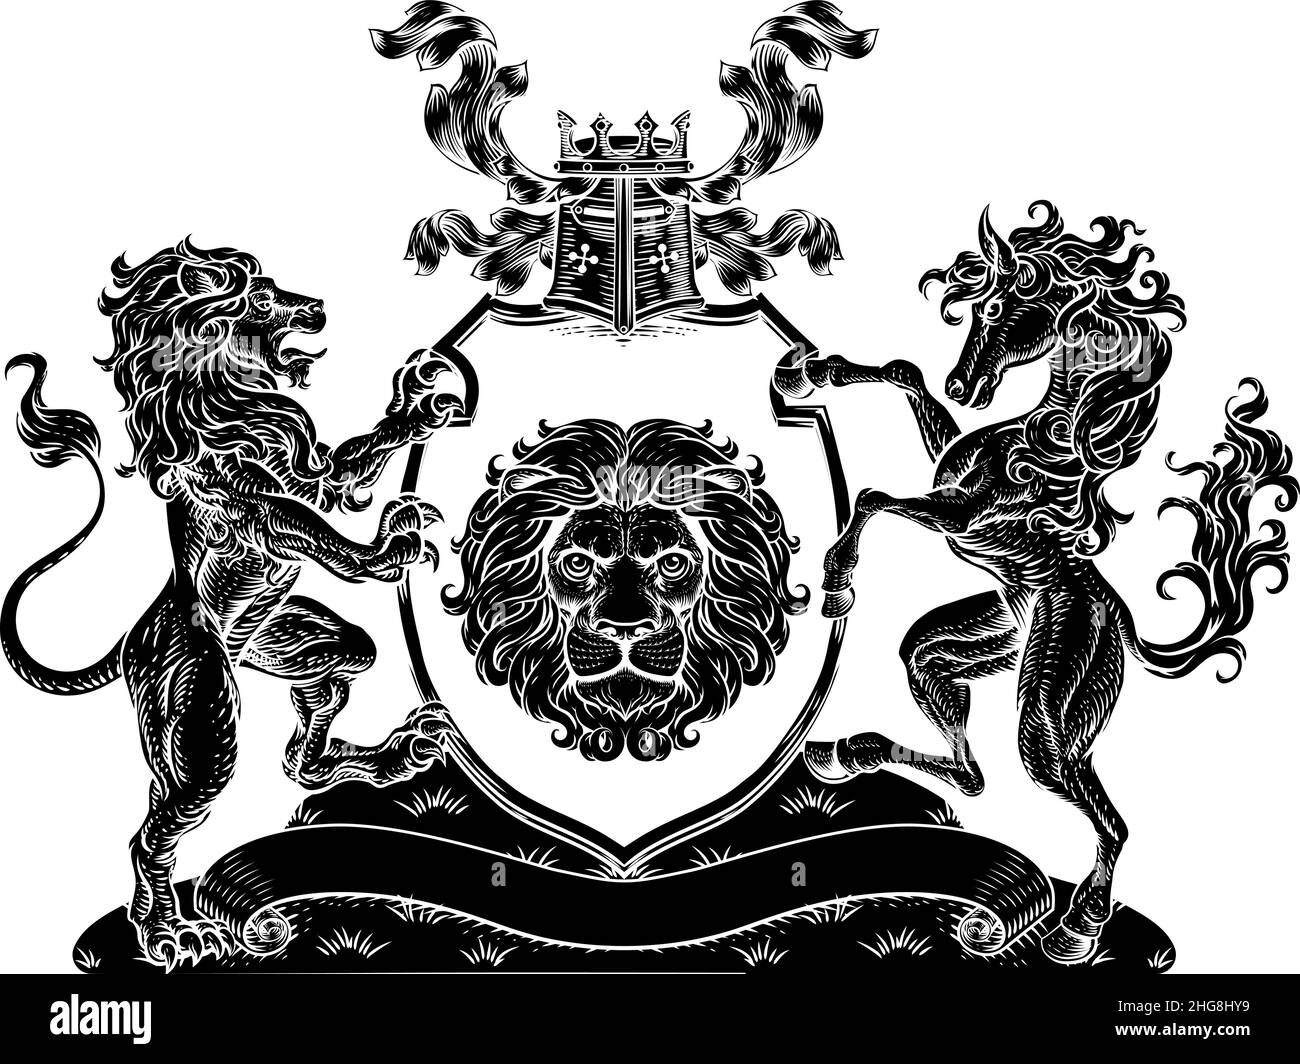 Coat of Arms Horse Lions Crest Shield Family Seal Stock Vector